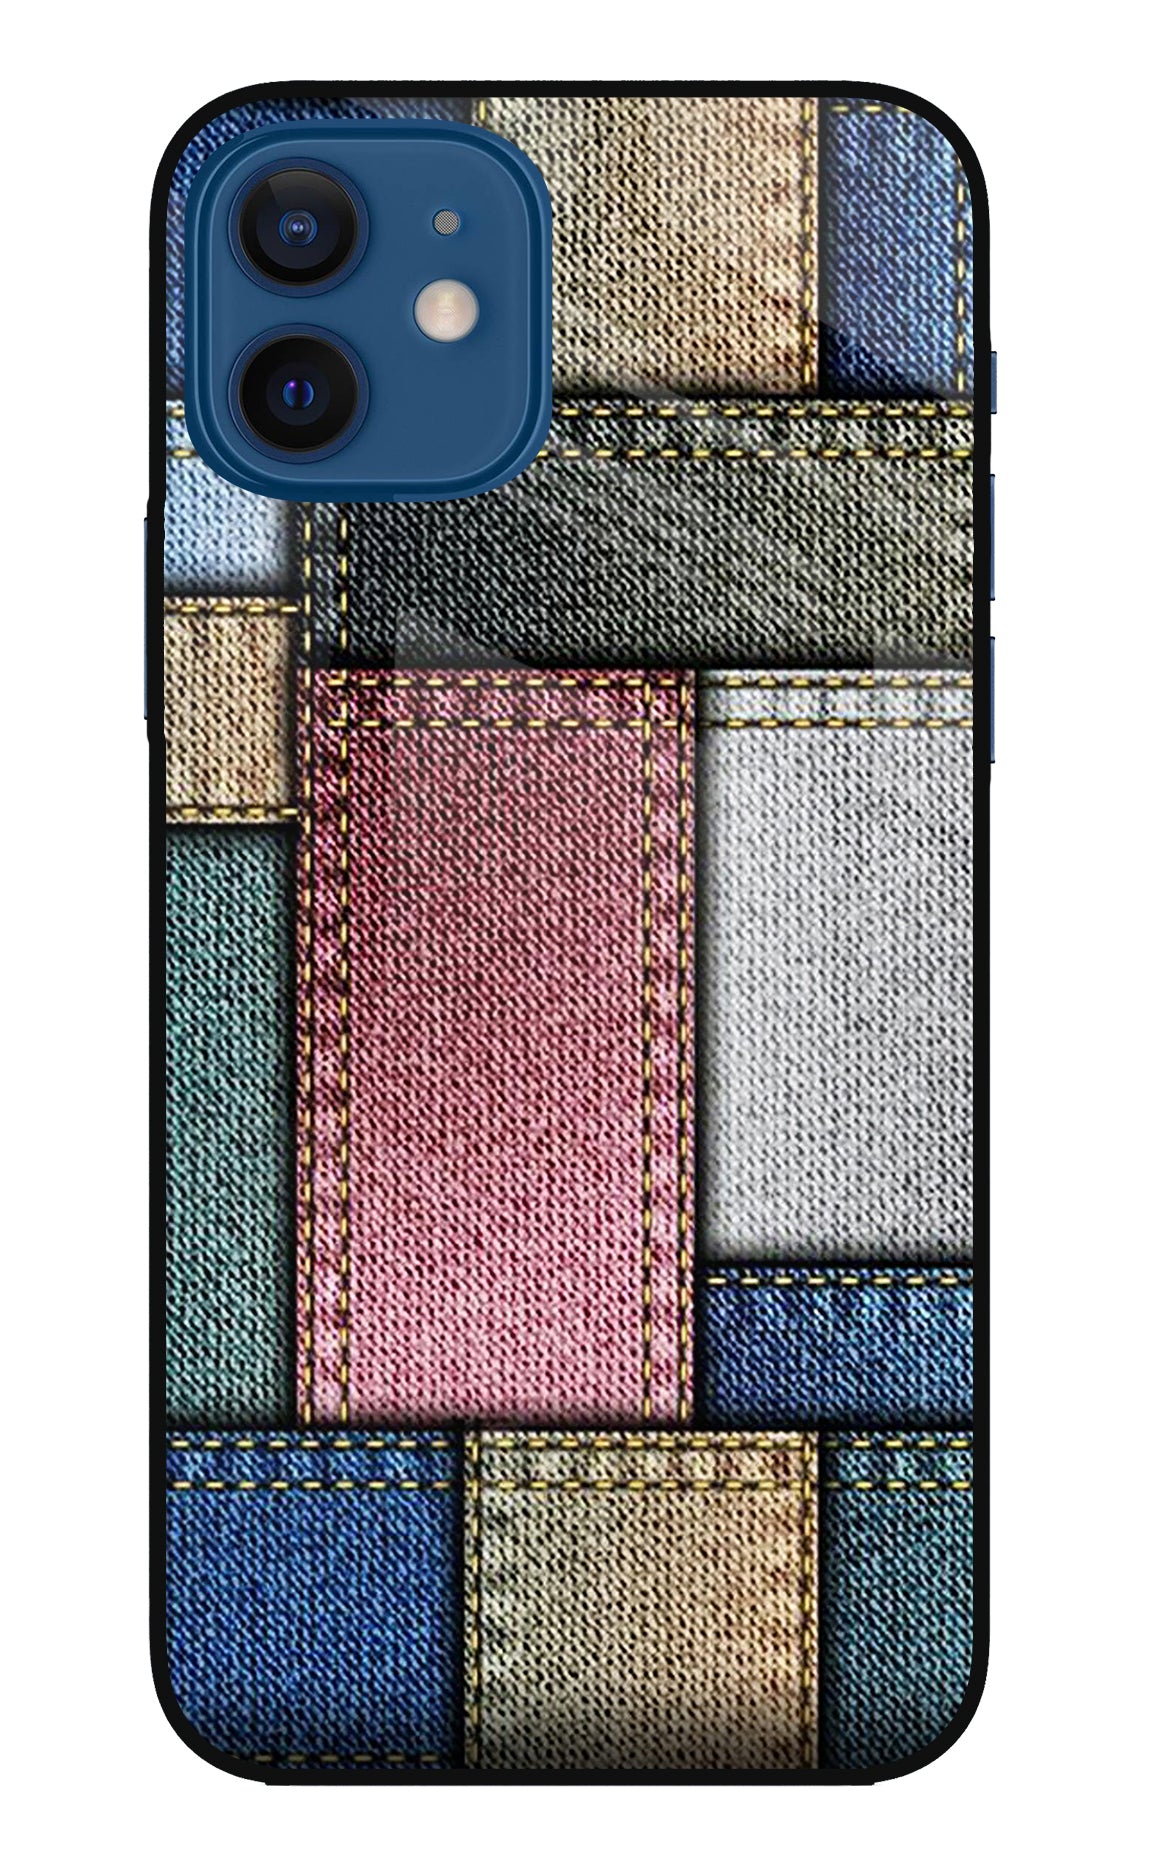 Multicolor Jeans iPhone 12 Back Cover